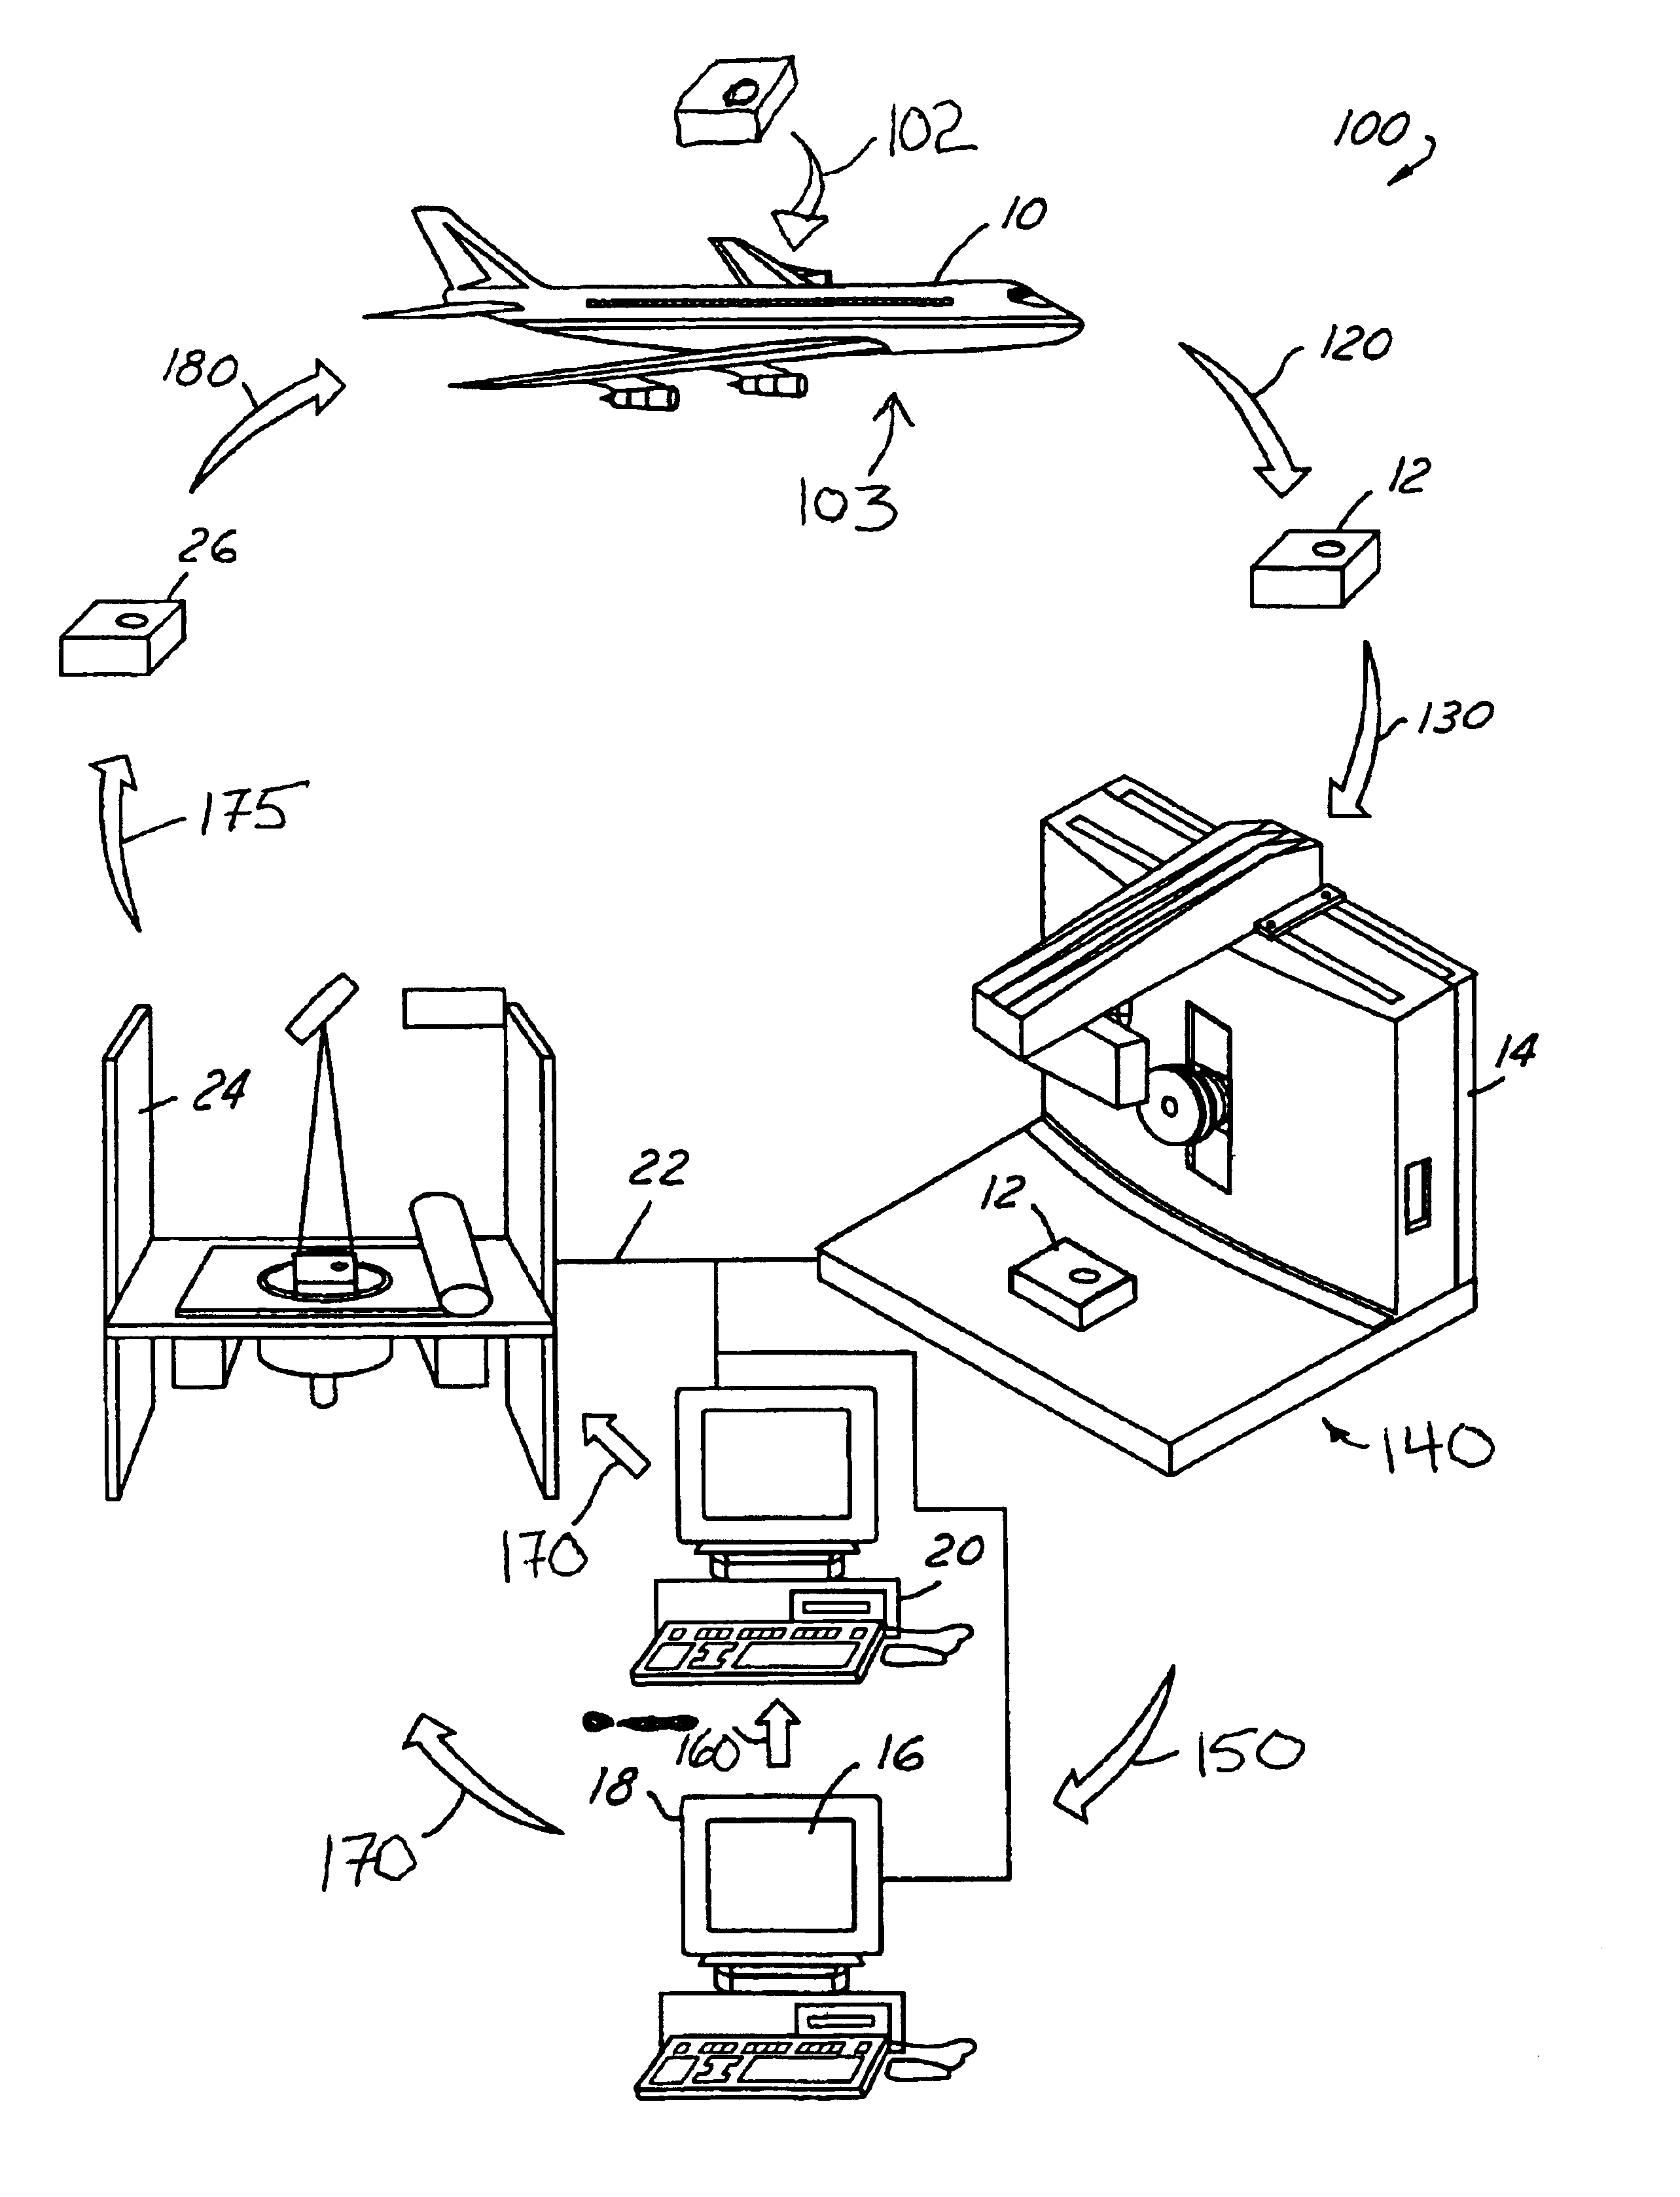 System for rapid manufacturing of replacement aerospace parts